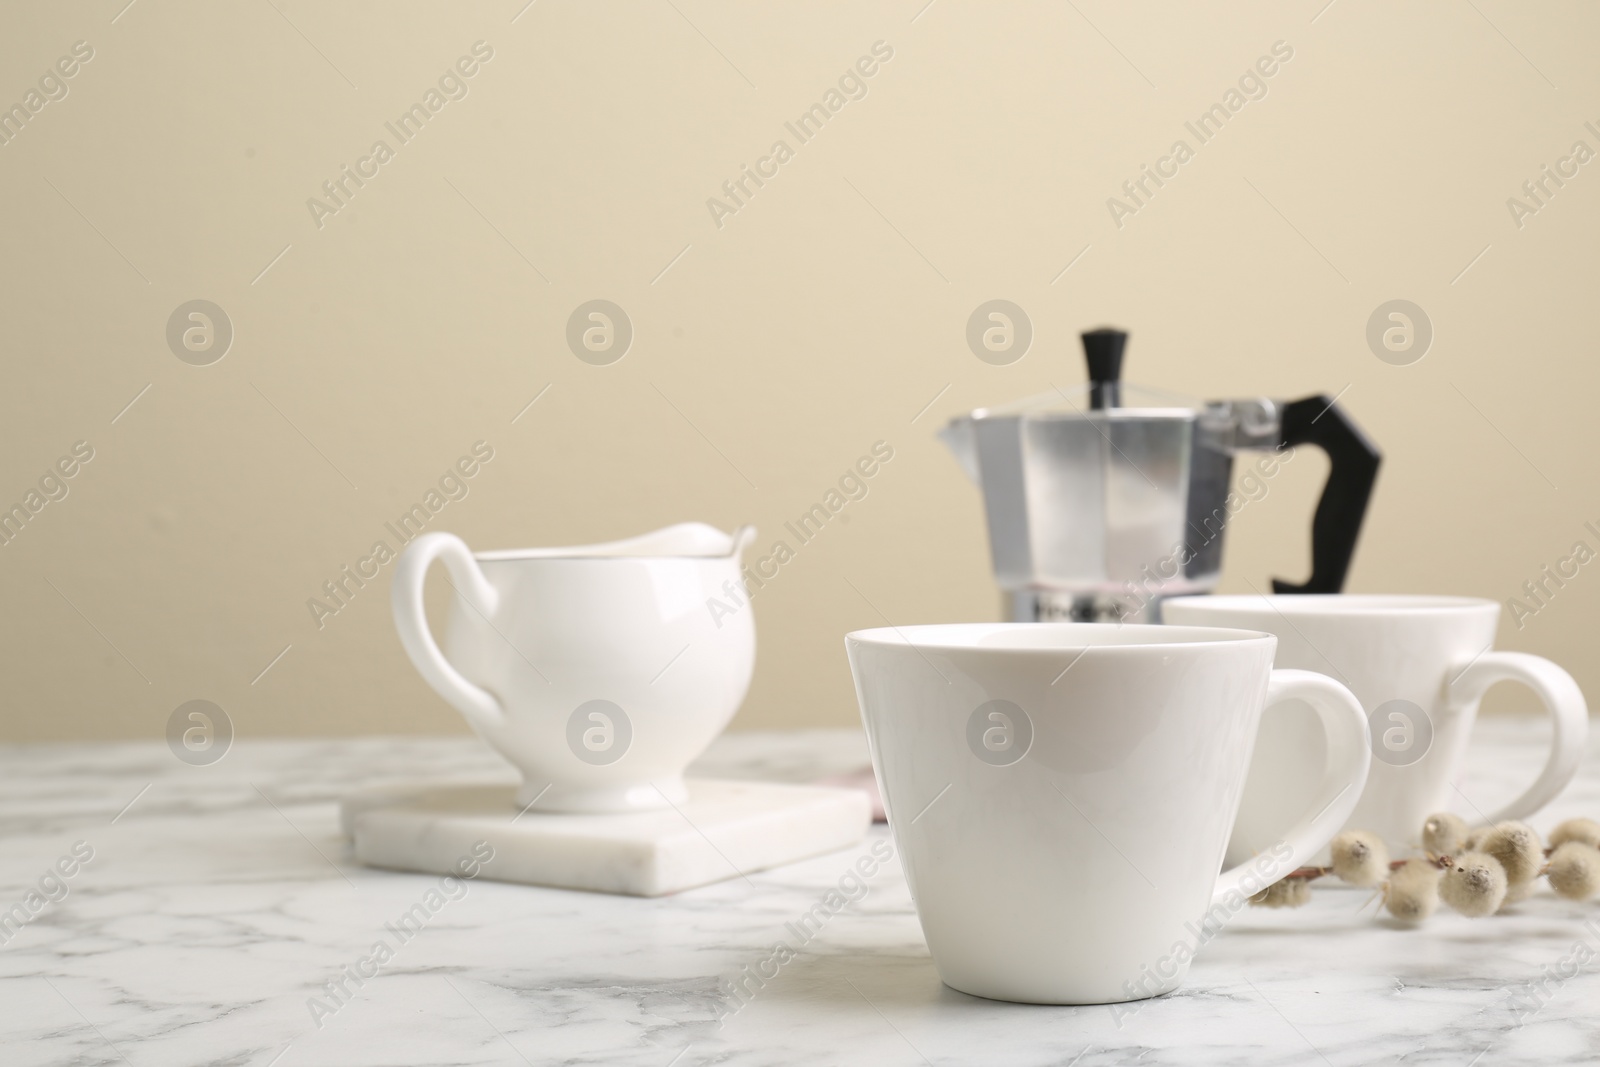 Photo of Cups, moka pot and jug on white marble table. Space for text